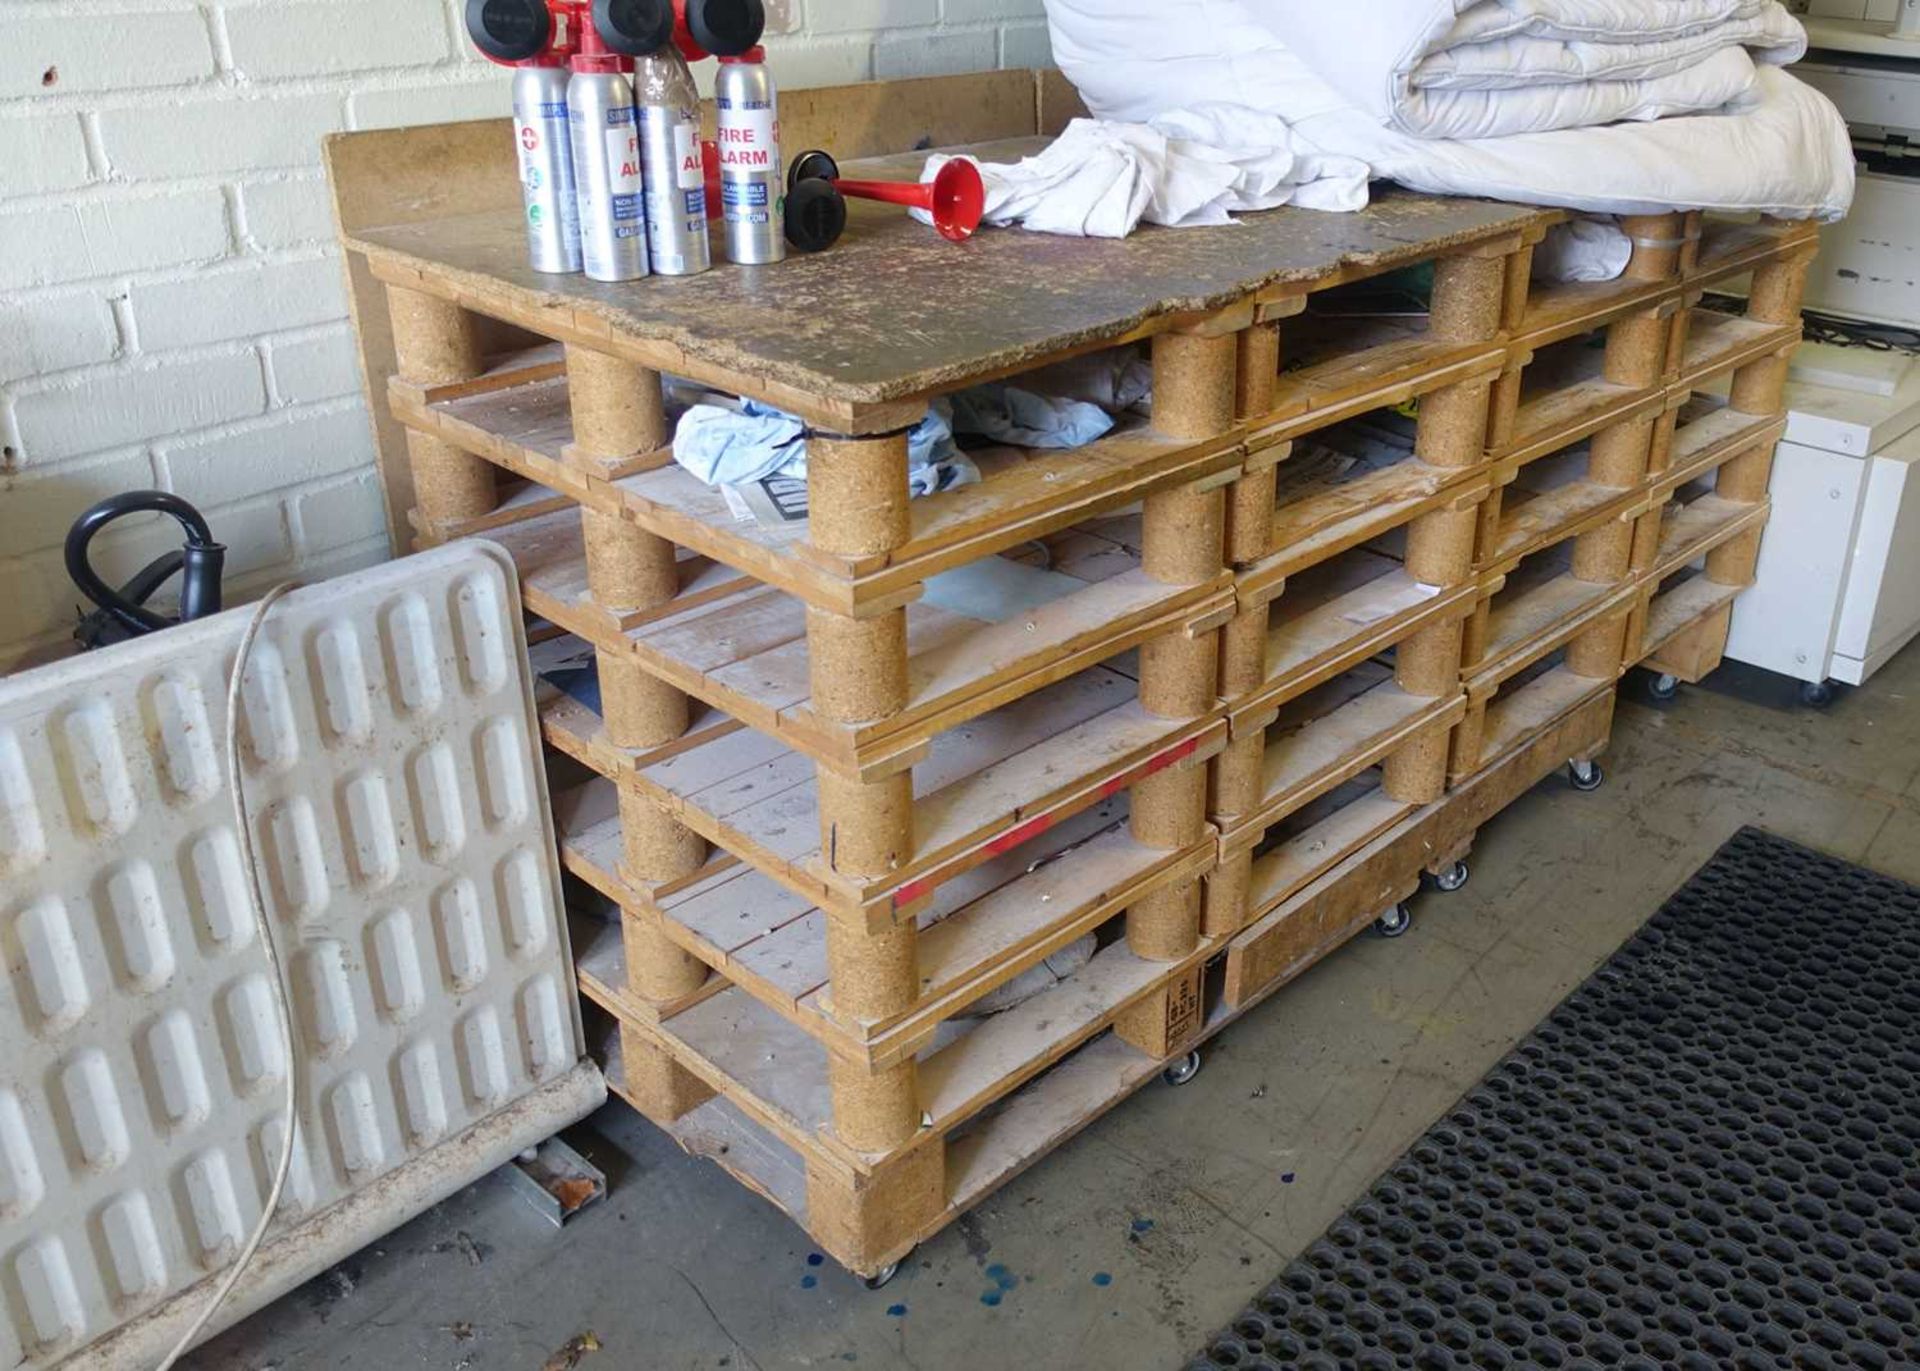 +VAT 2 metal 4 drawer filing cabinets, 3 mobile trolleys made from pallets and a metal frame 2